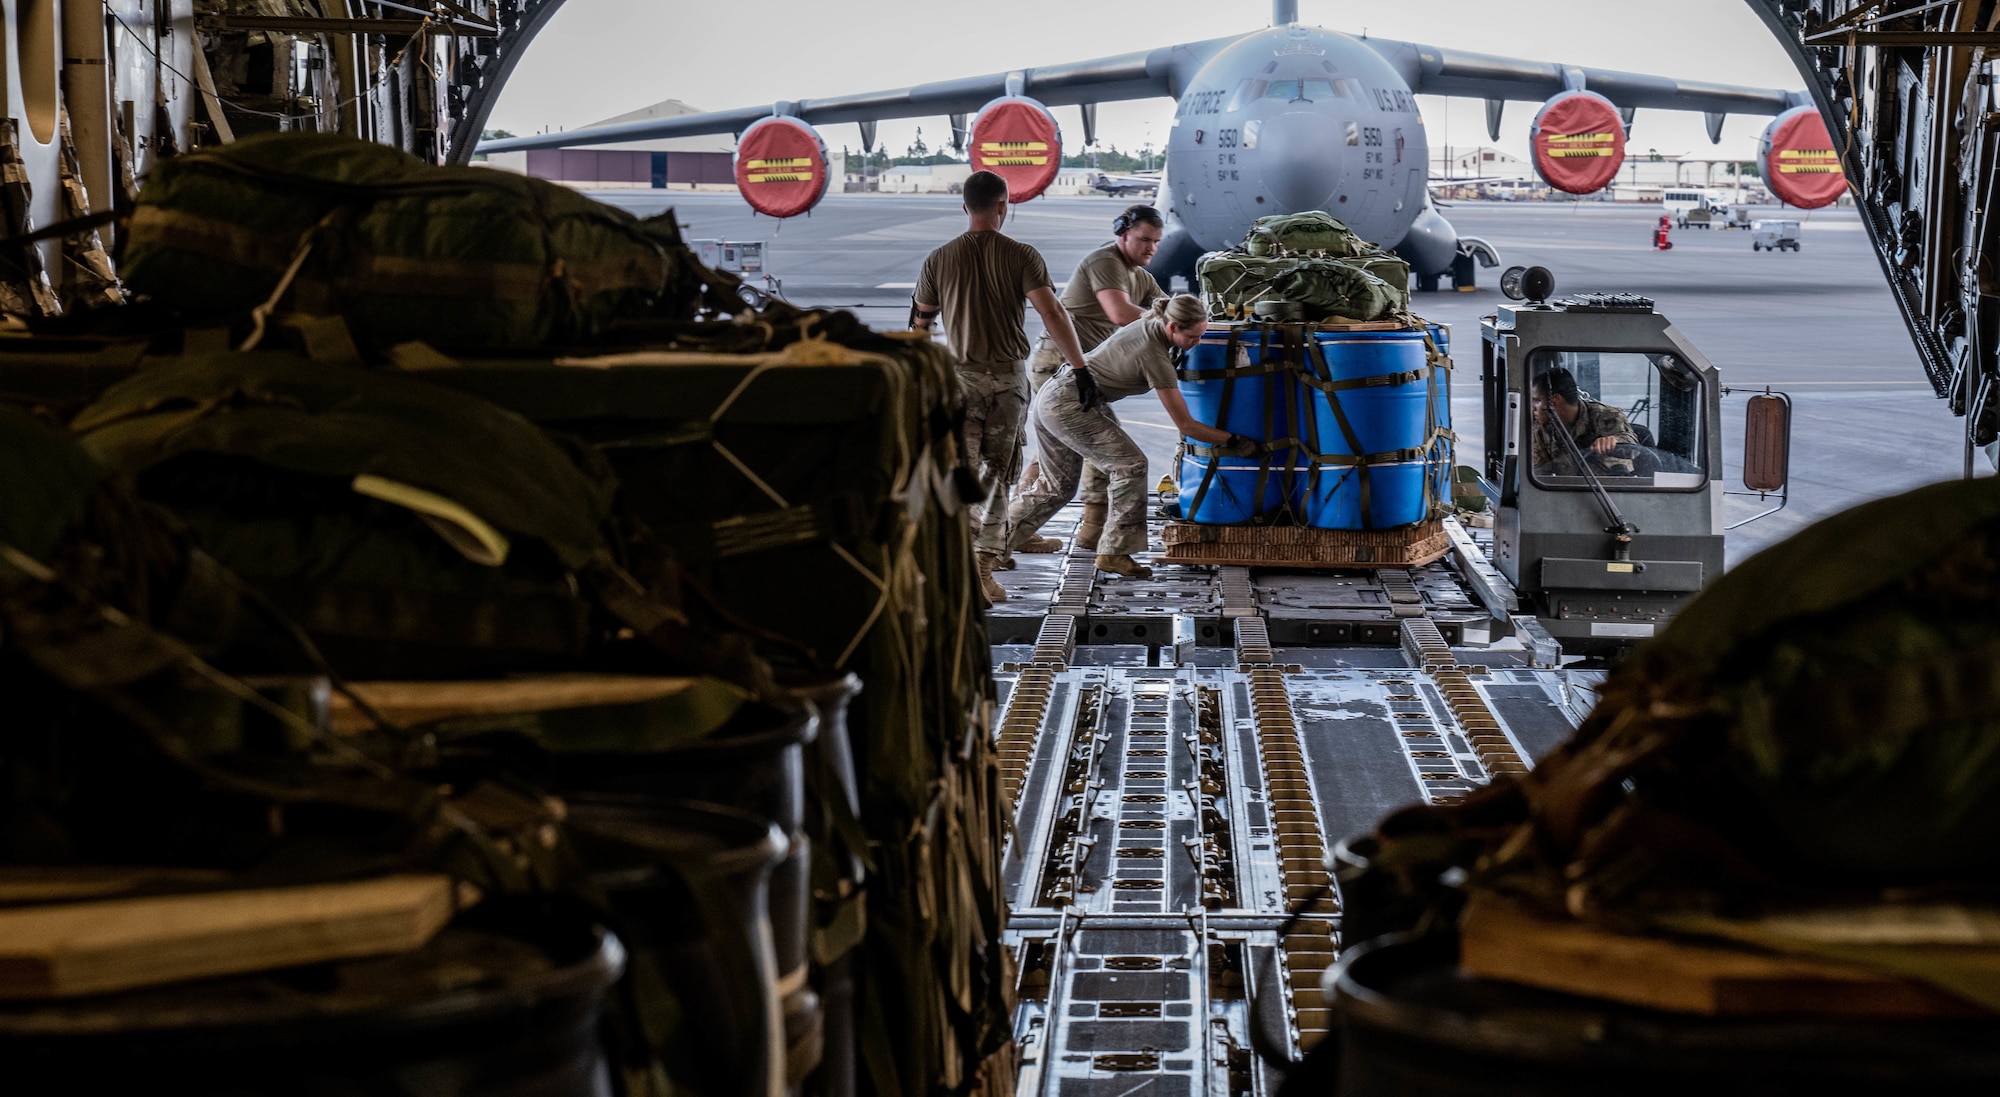 Airmen assigned to the 535th Airlift Squadron and the 647th Logistics Readiness Squadron load  container delivery system bundles onto a C-17 Globemaster III in support of an air drop exercise  at Joint Base Pearl Harbor-Hickam, Hawaii, Aug. 24, 2022. Airdrop exercises provide Airmen with real world training opportunities to advance the 15th Wing’s mission of rapid global mobility. (U.S. Air Force photo by Senior Airman Makensie Cooper)